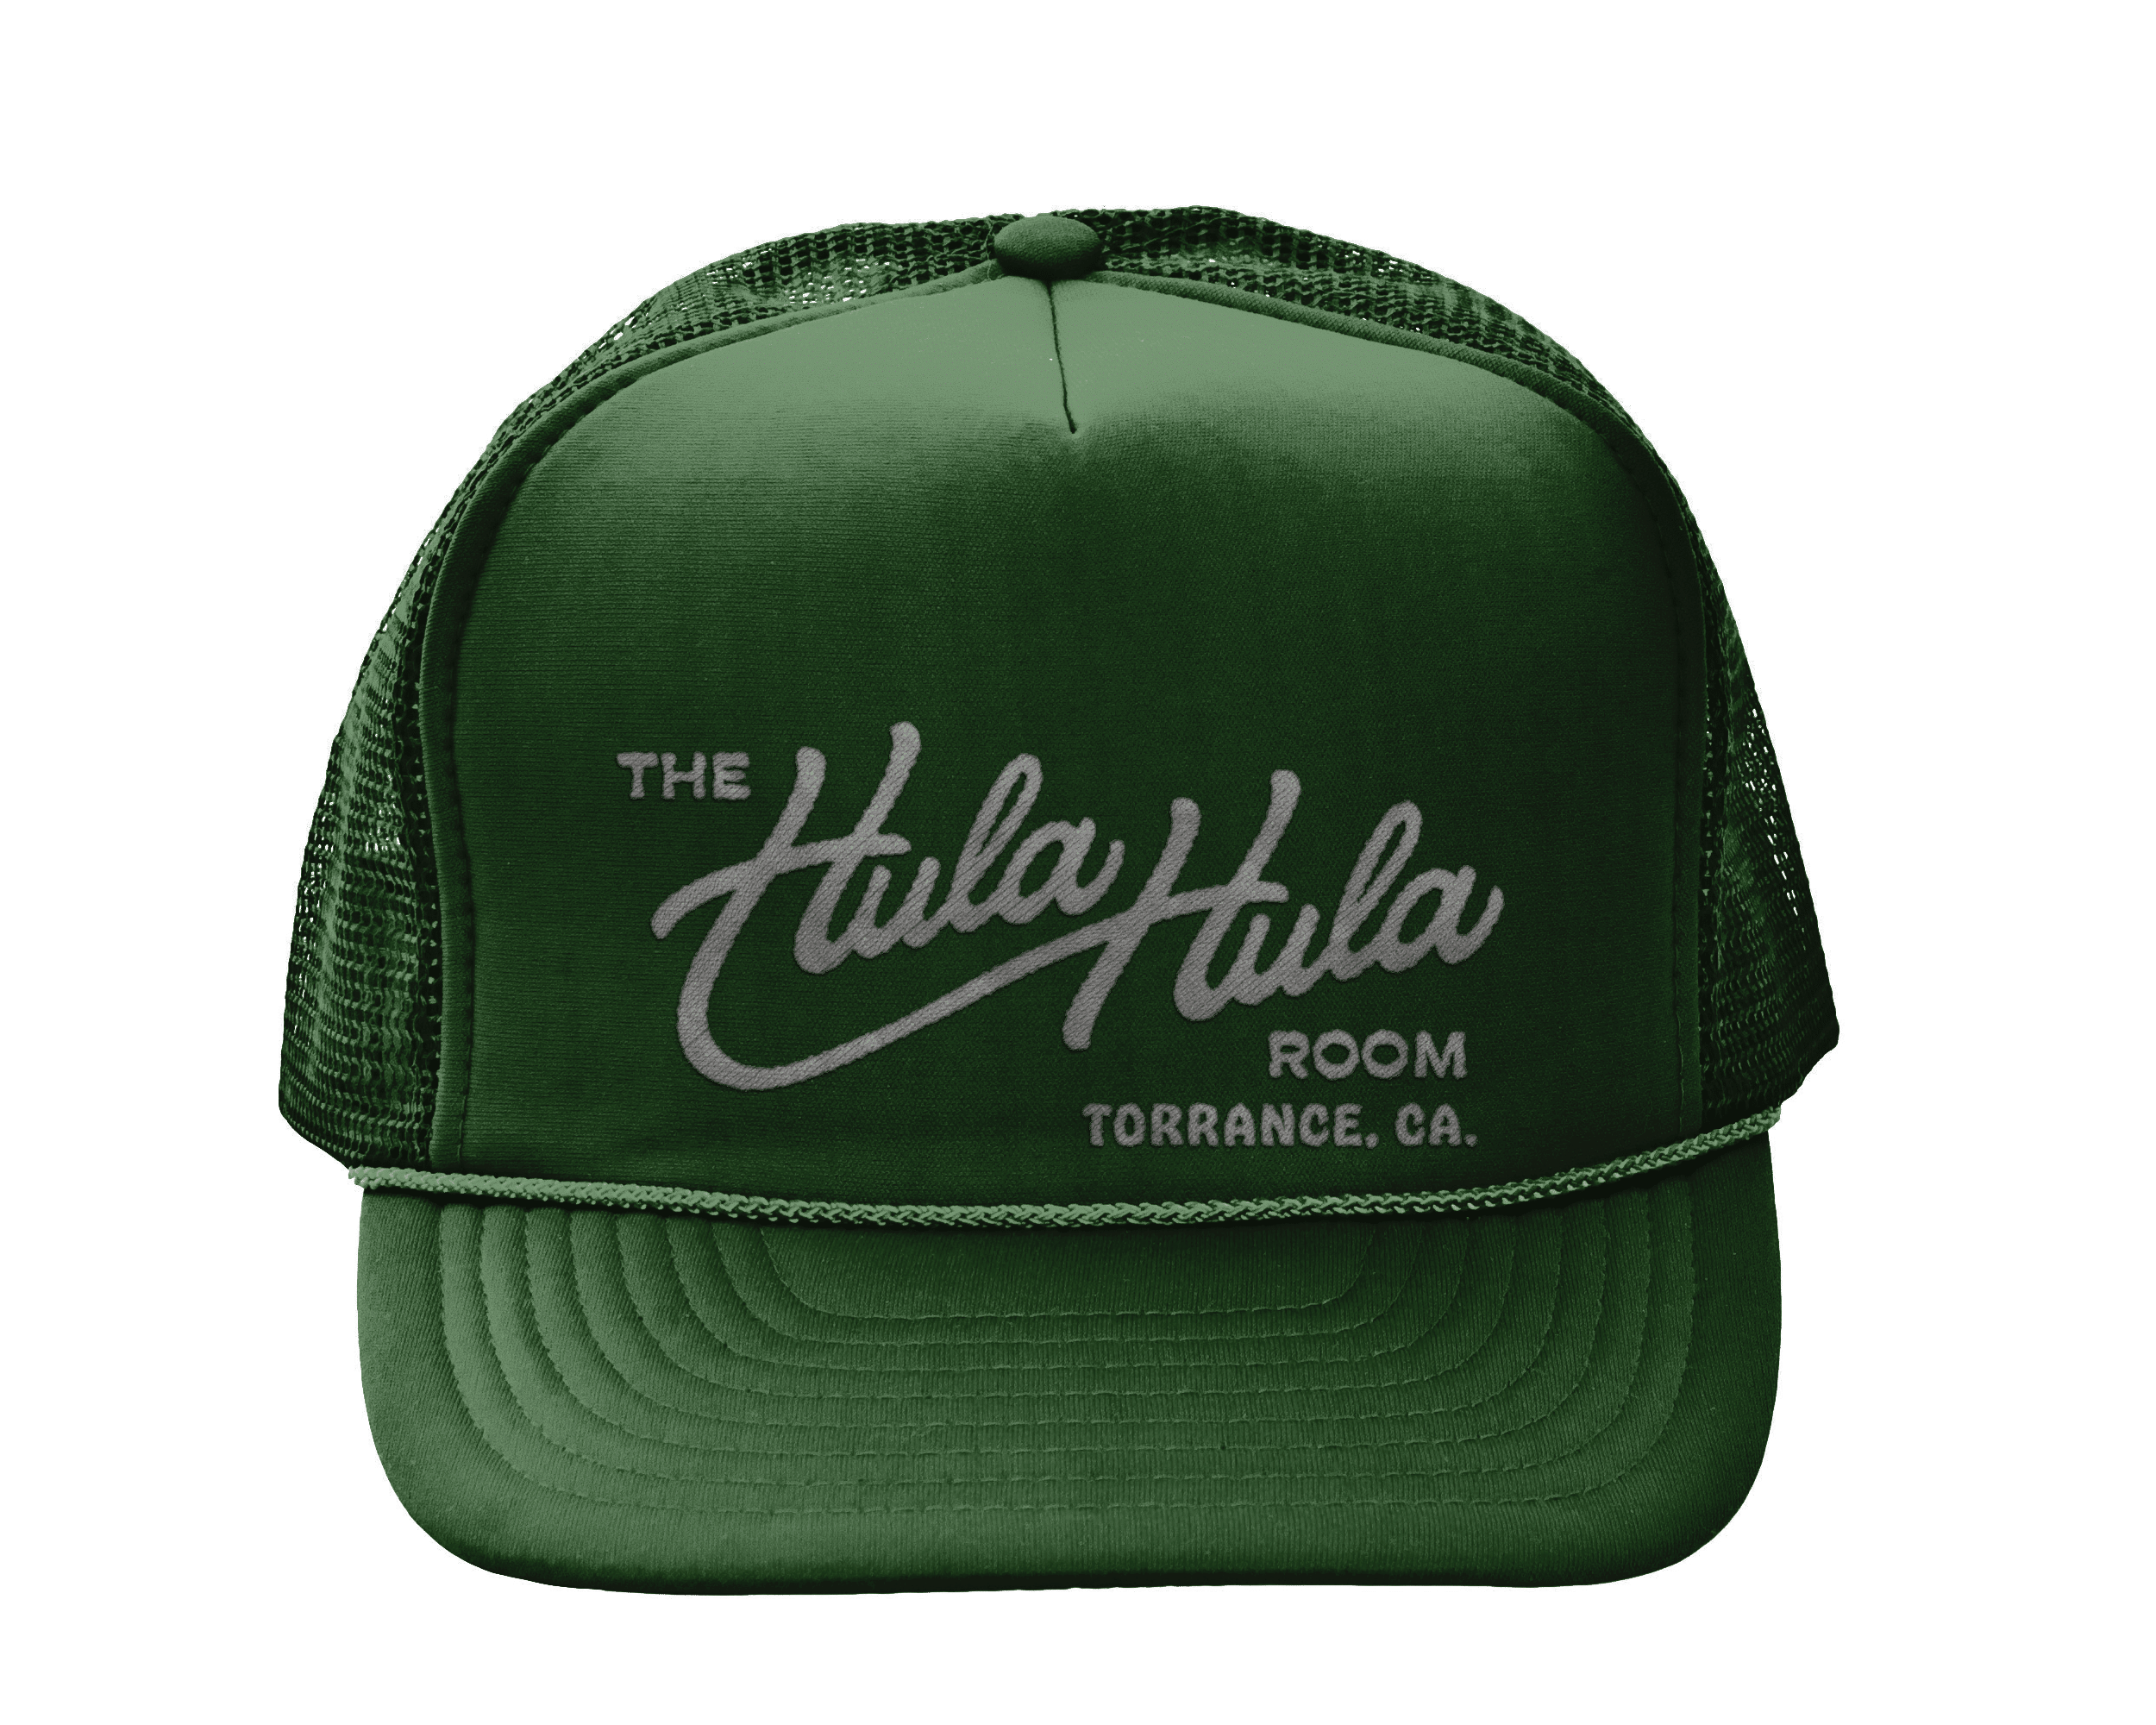 Trucker hat for The Hula Hula Room Tiki Bar in Torrance California designed by Stellen Design logo design and branding agency in Los Angeles California specializing in logo design for hospitality brands